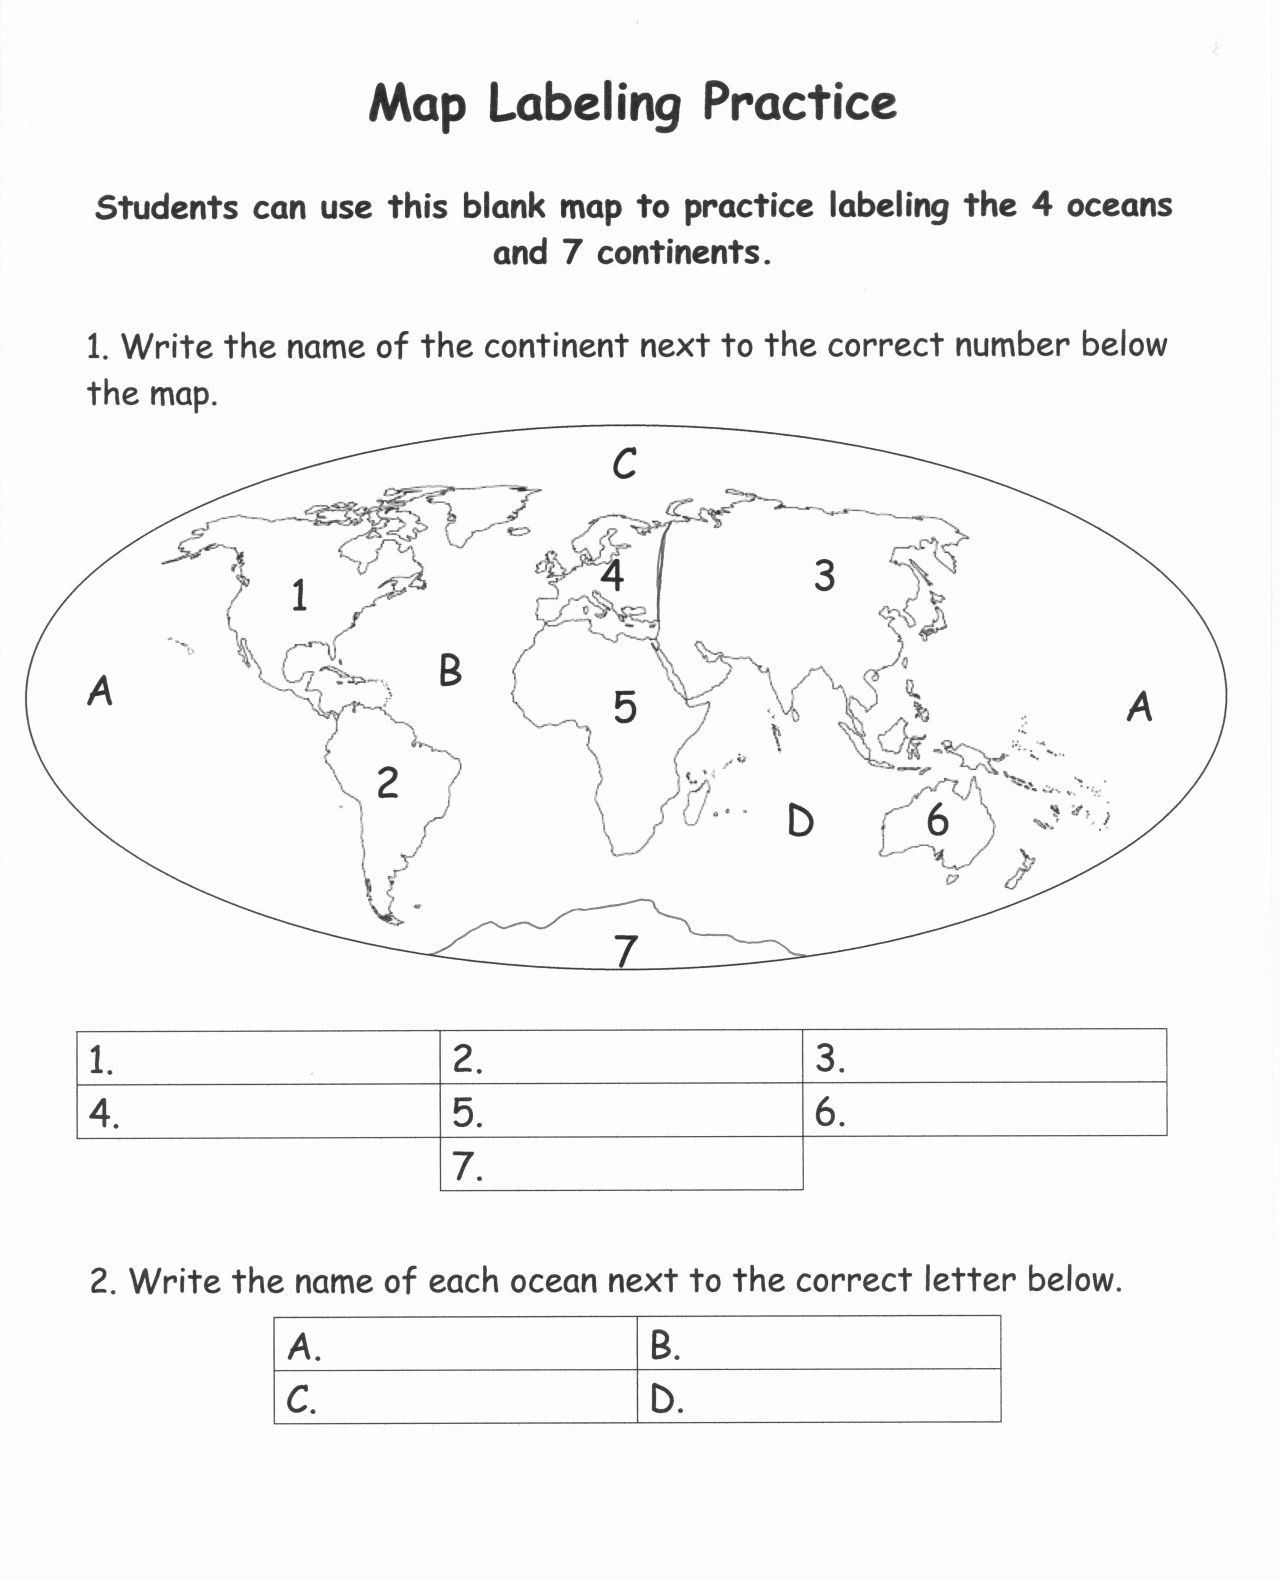 Continents and Oceans Worksheet Printable Lovely Continents and Oceans Worksheet Pdf Free thekidsworksheet